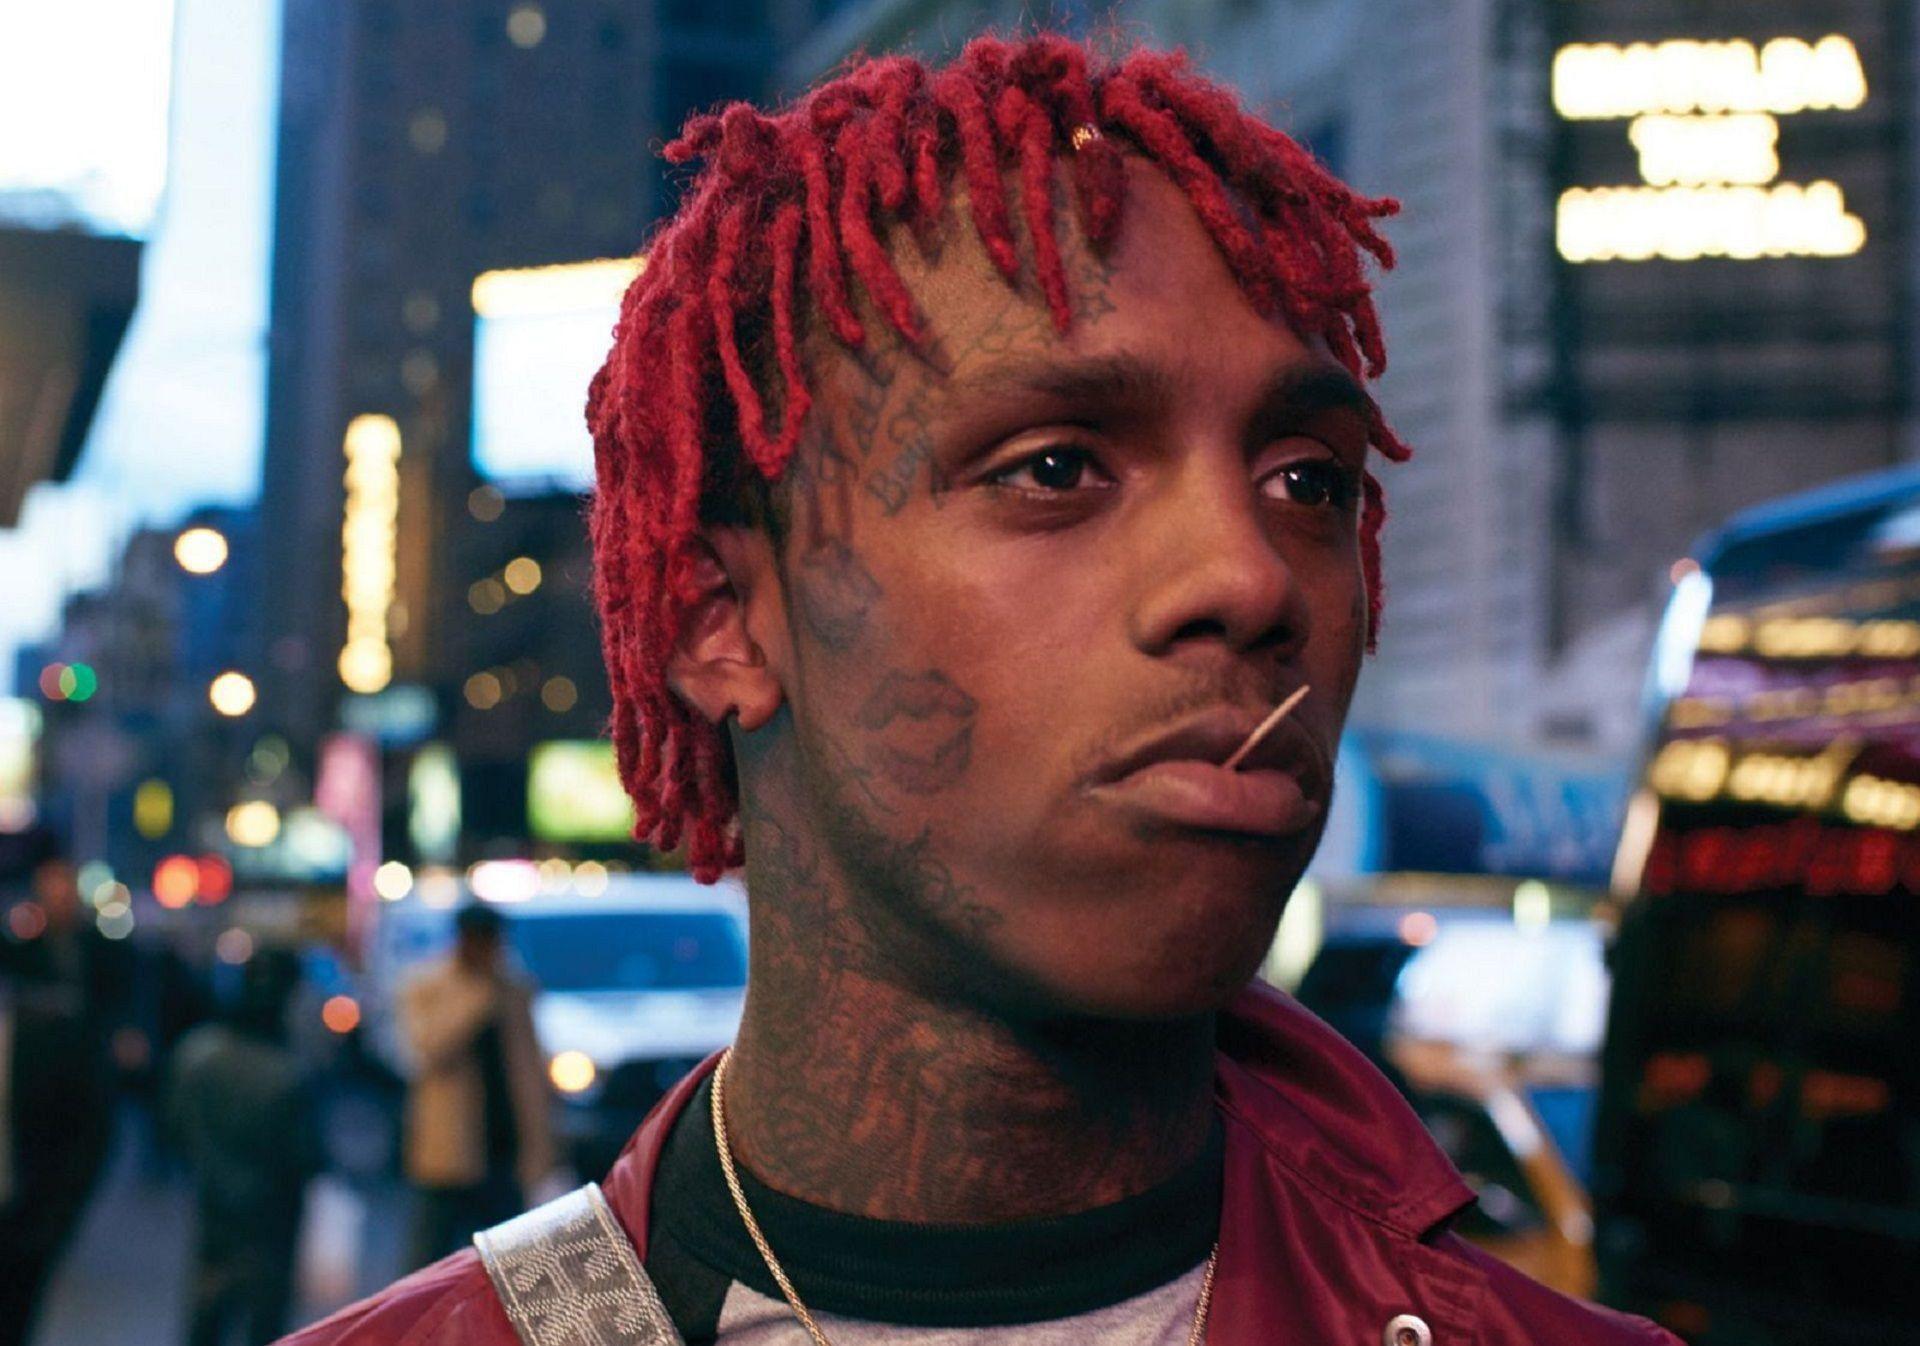 lost in the sea famous dex download